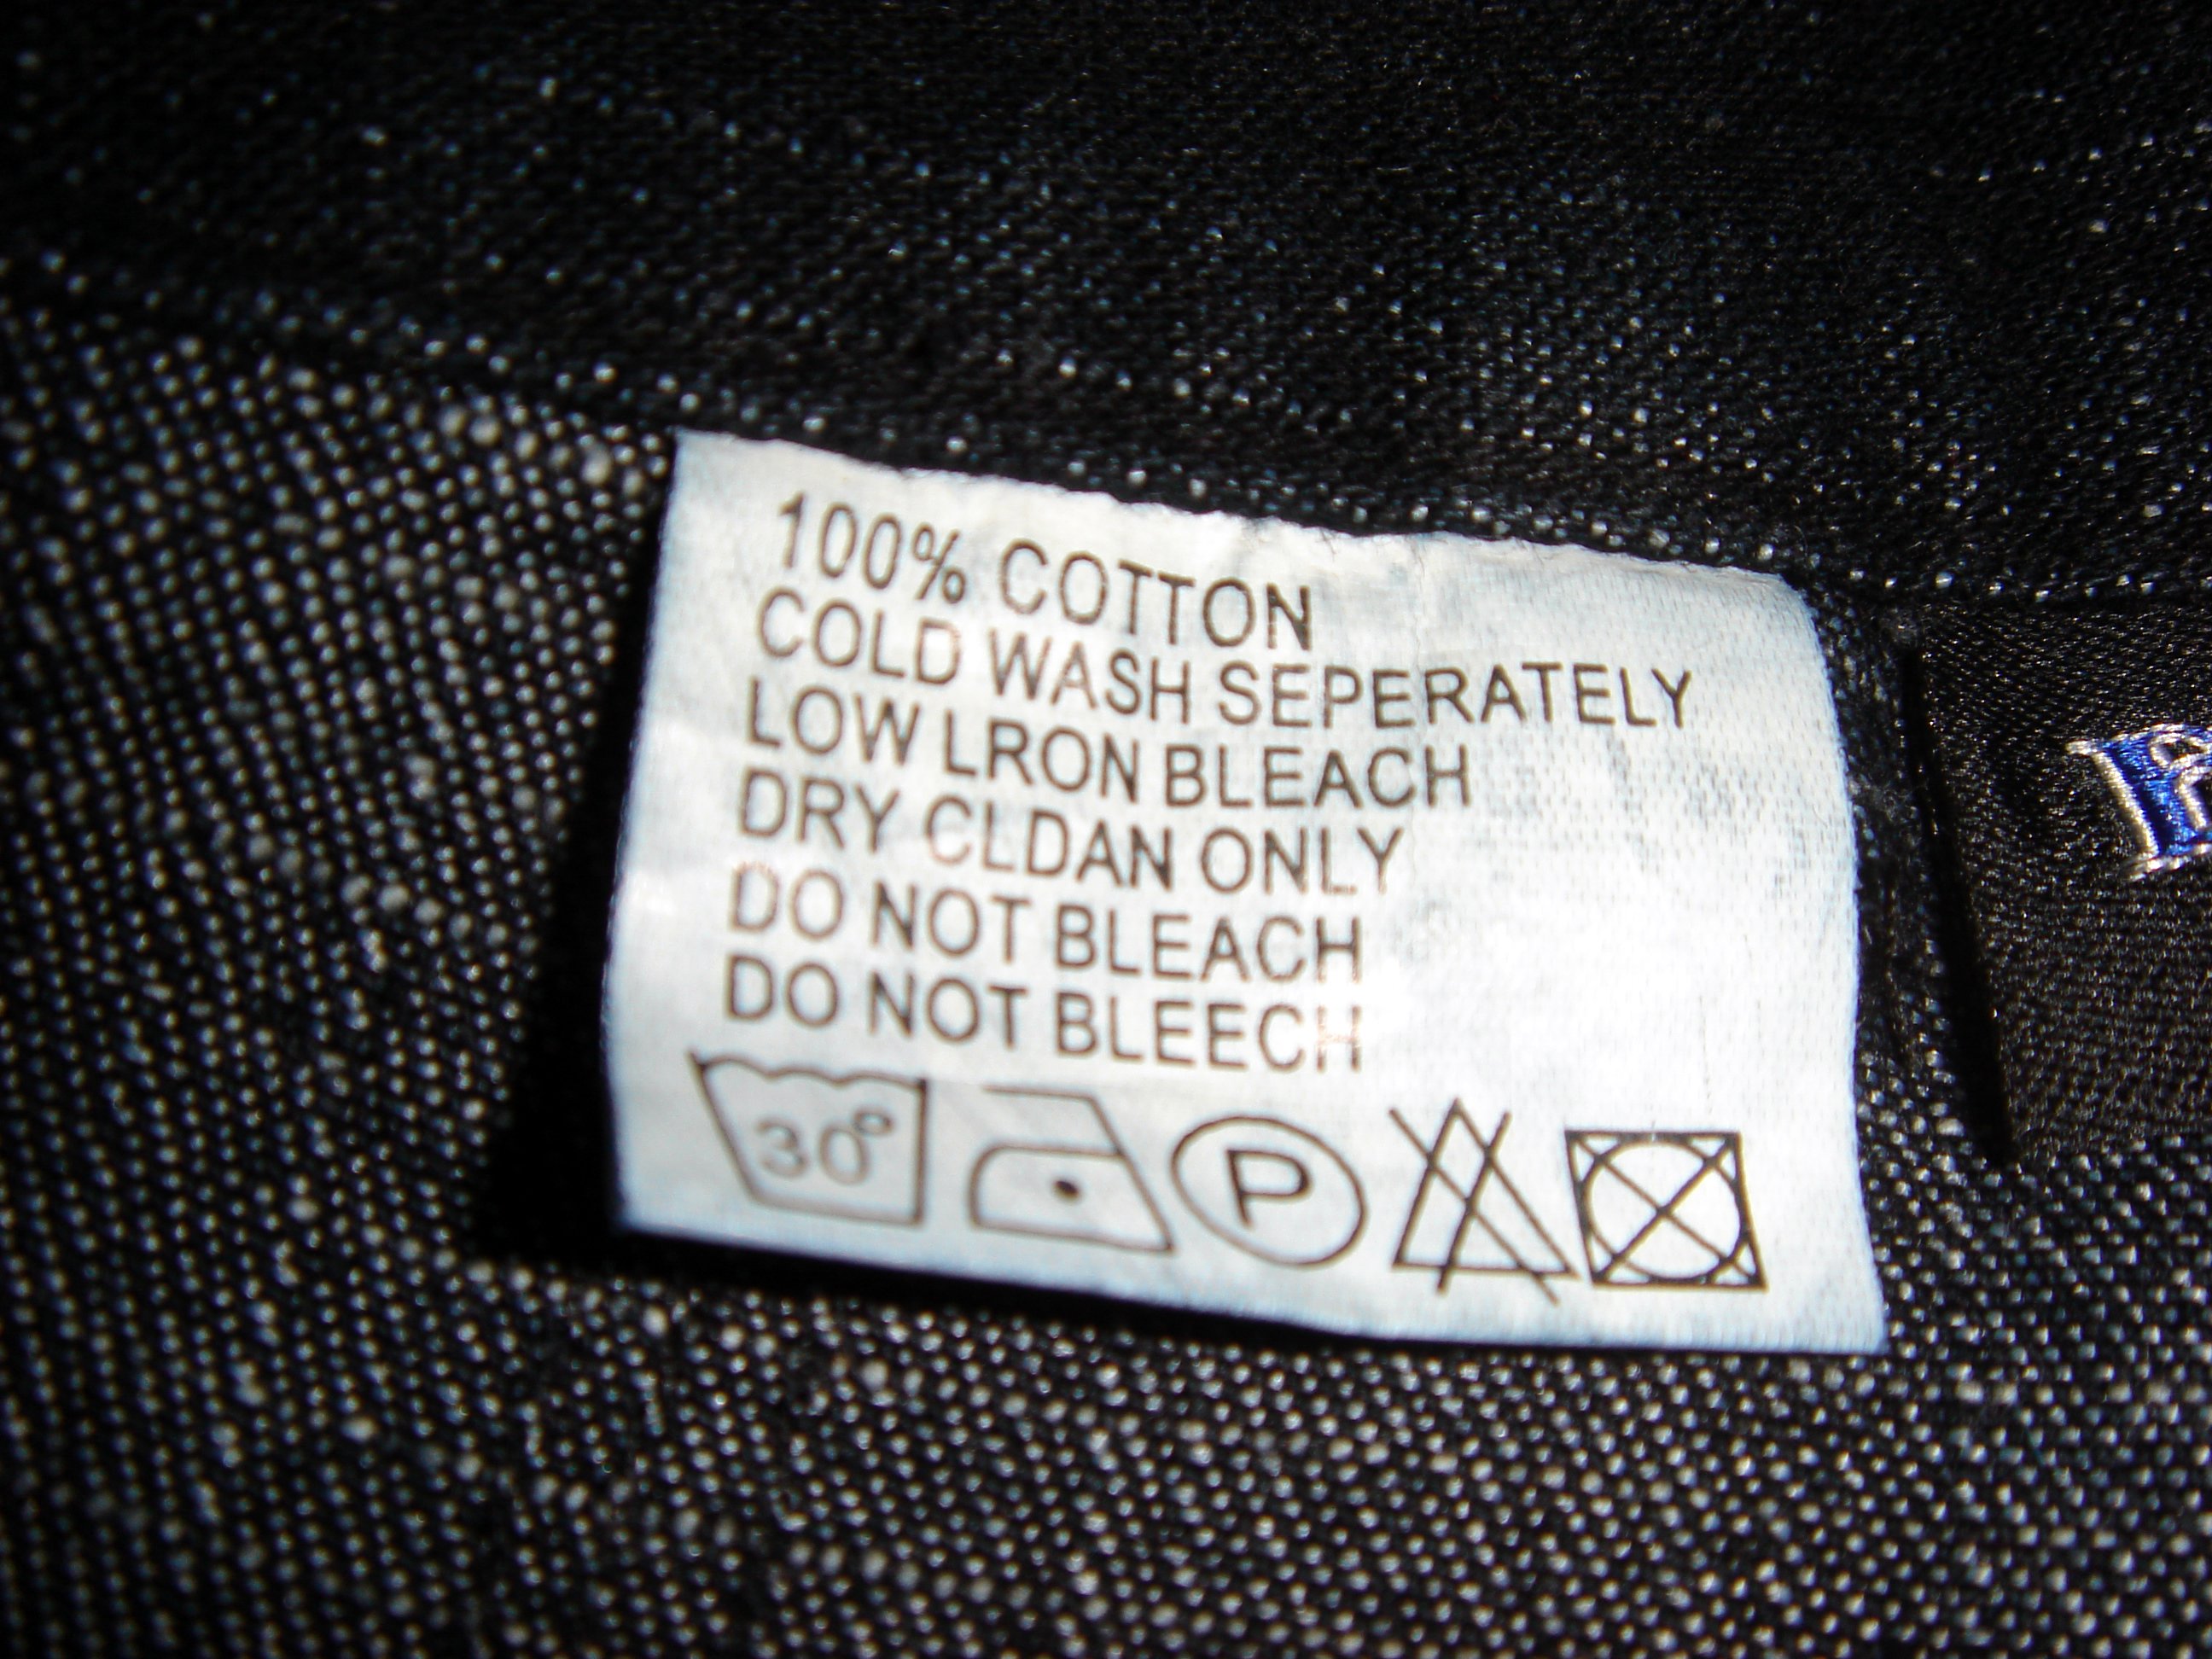 How Do I Know if Something is Dry Clean Only